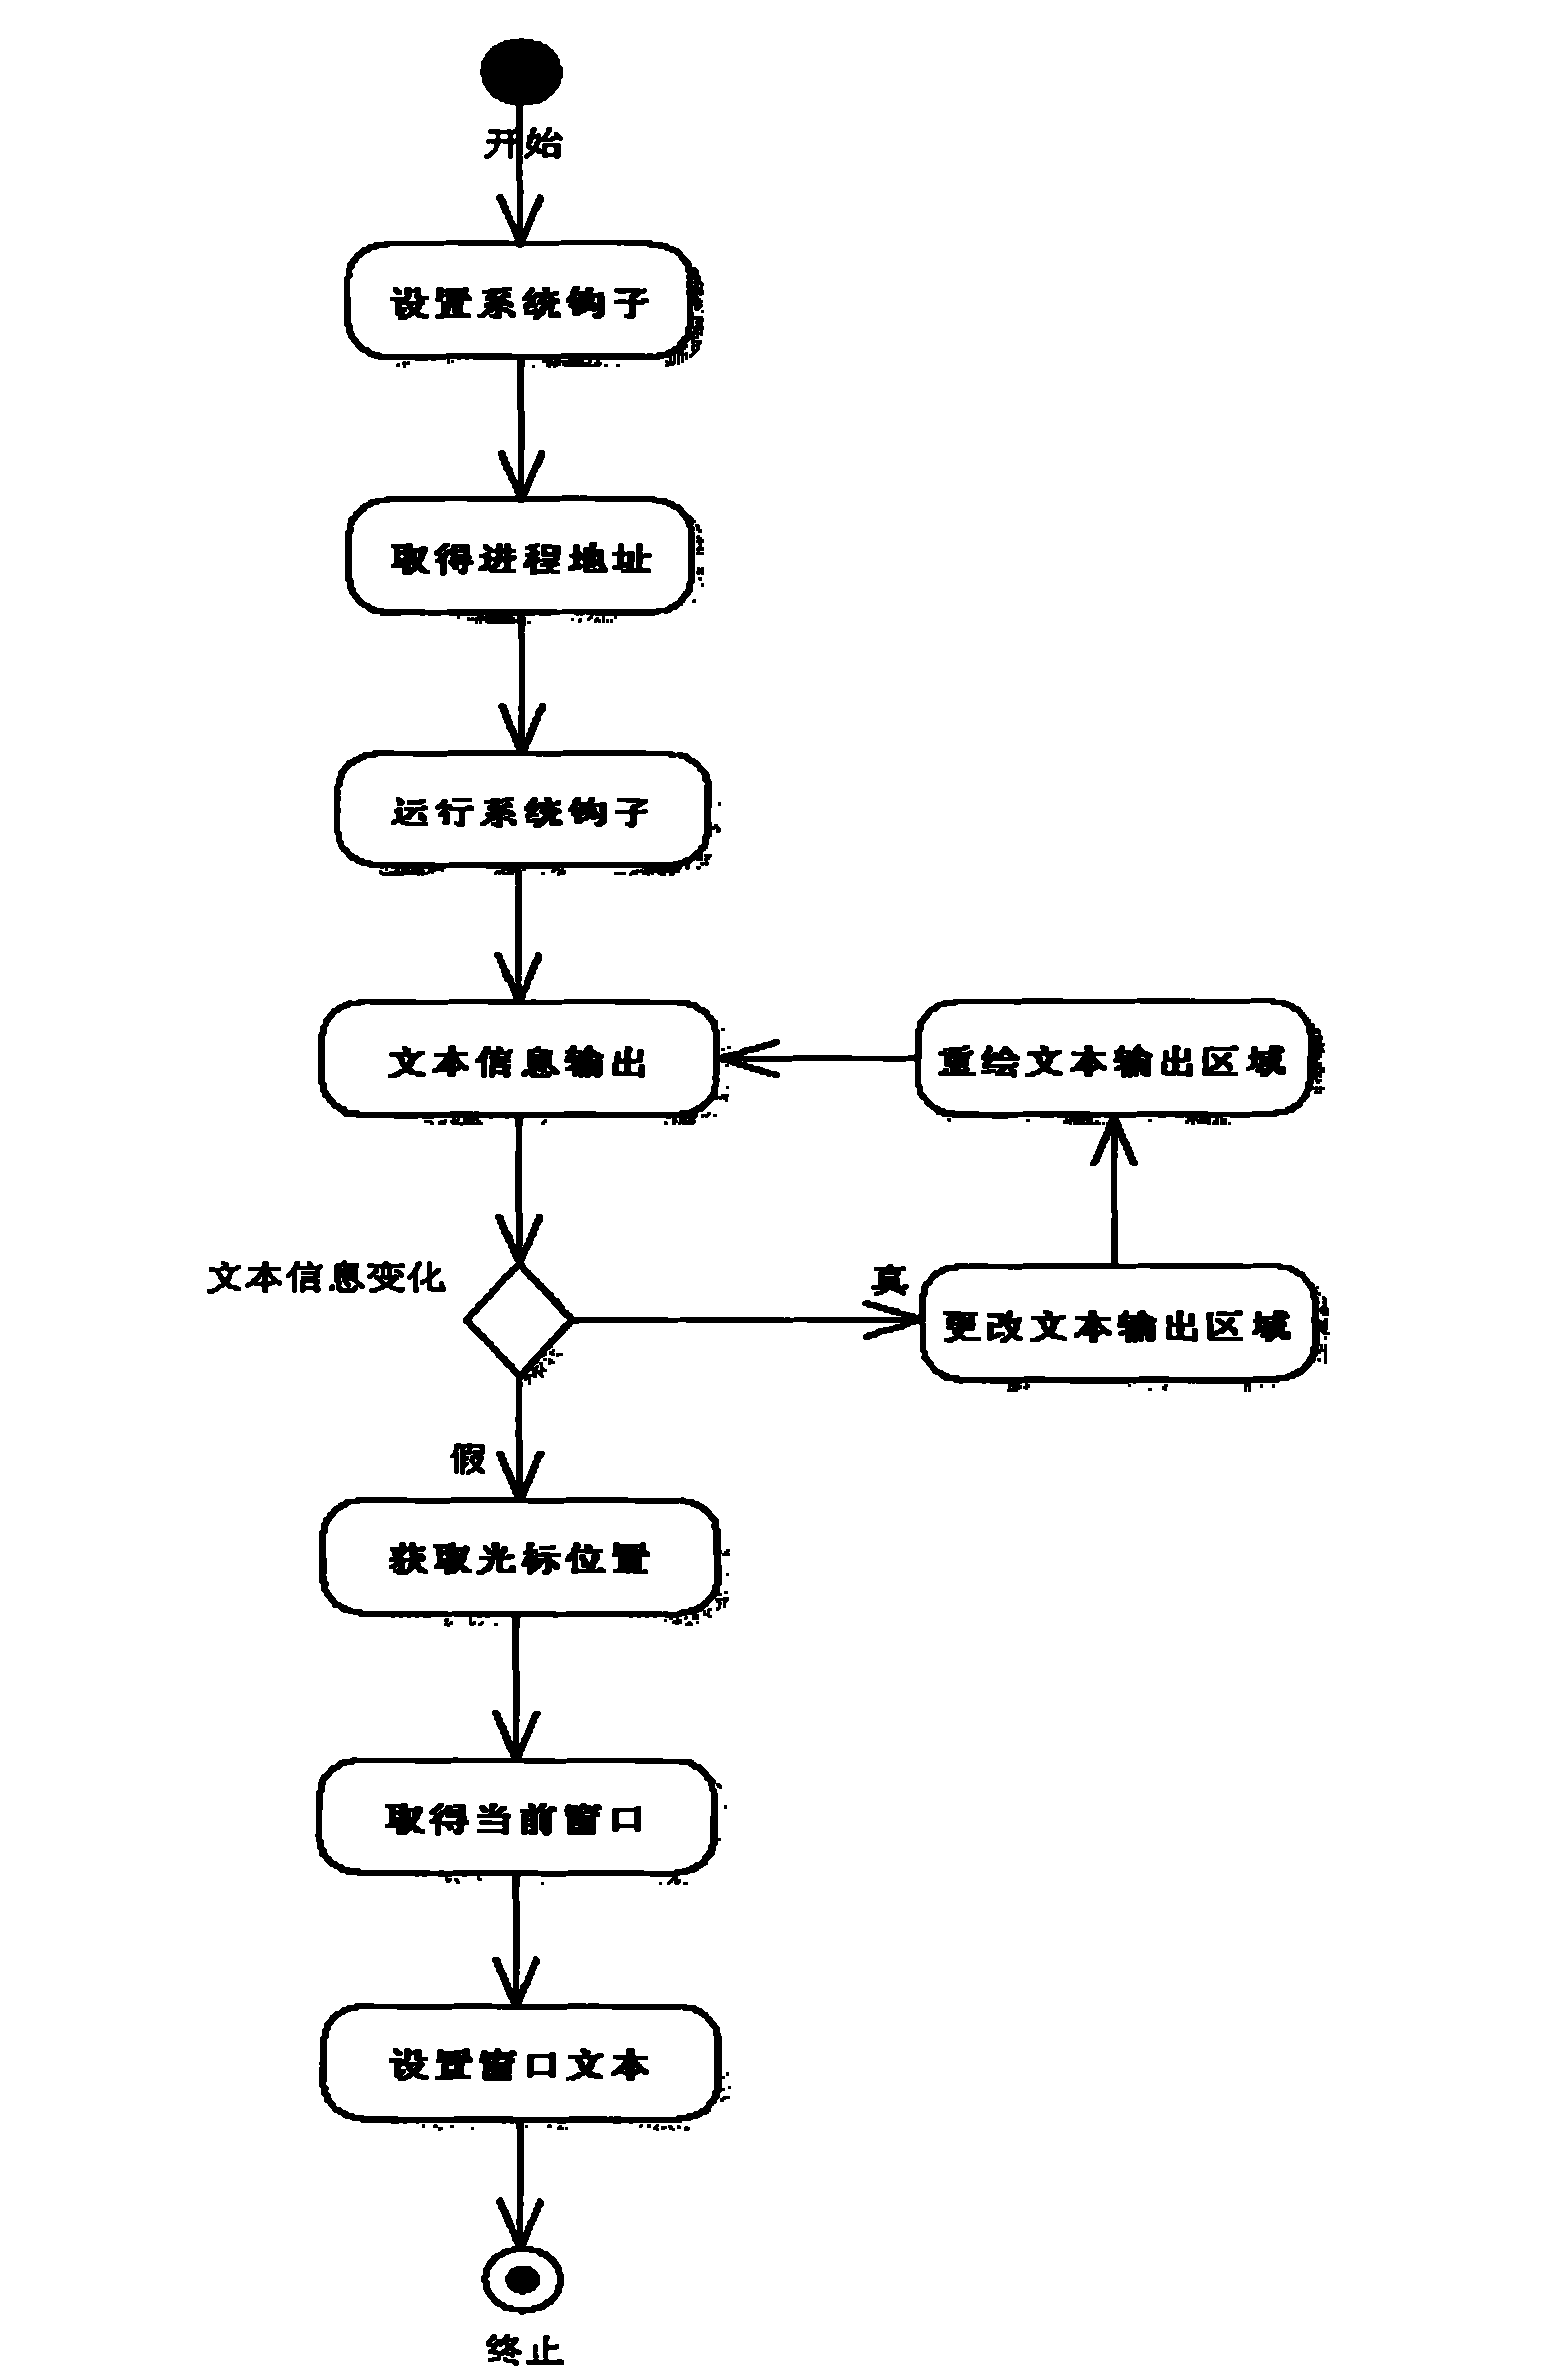 Method for extracting computer screen information for medical administration